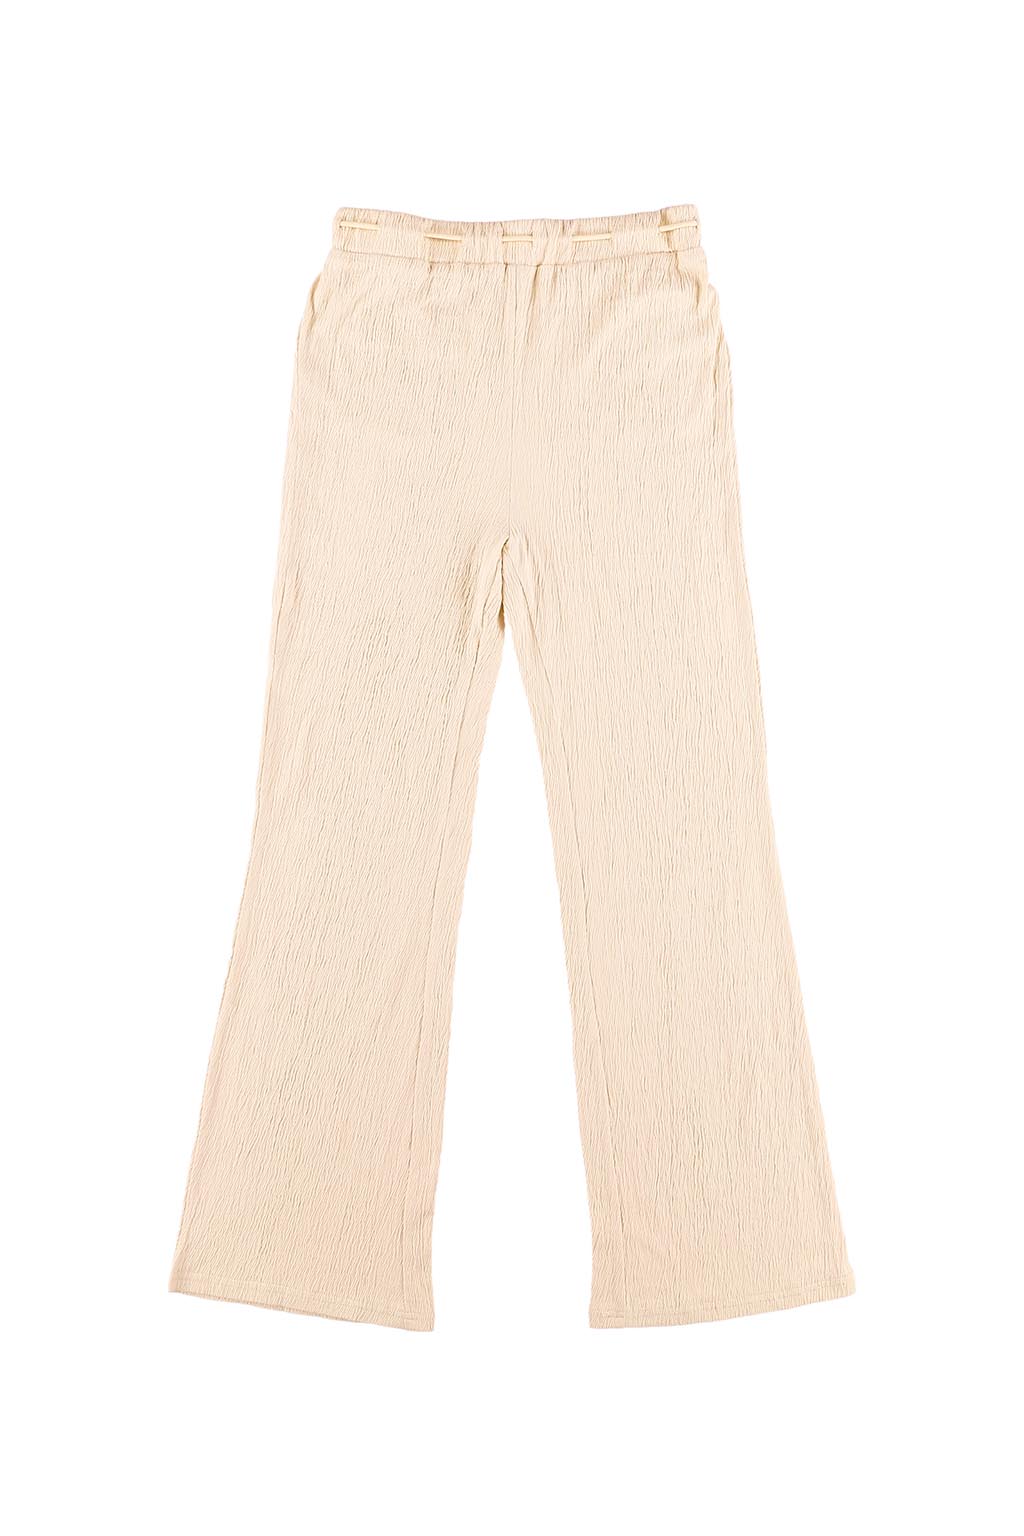 Waist String Relax Pants Ivory 2